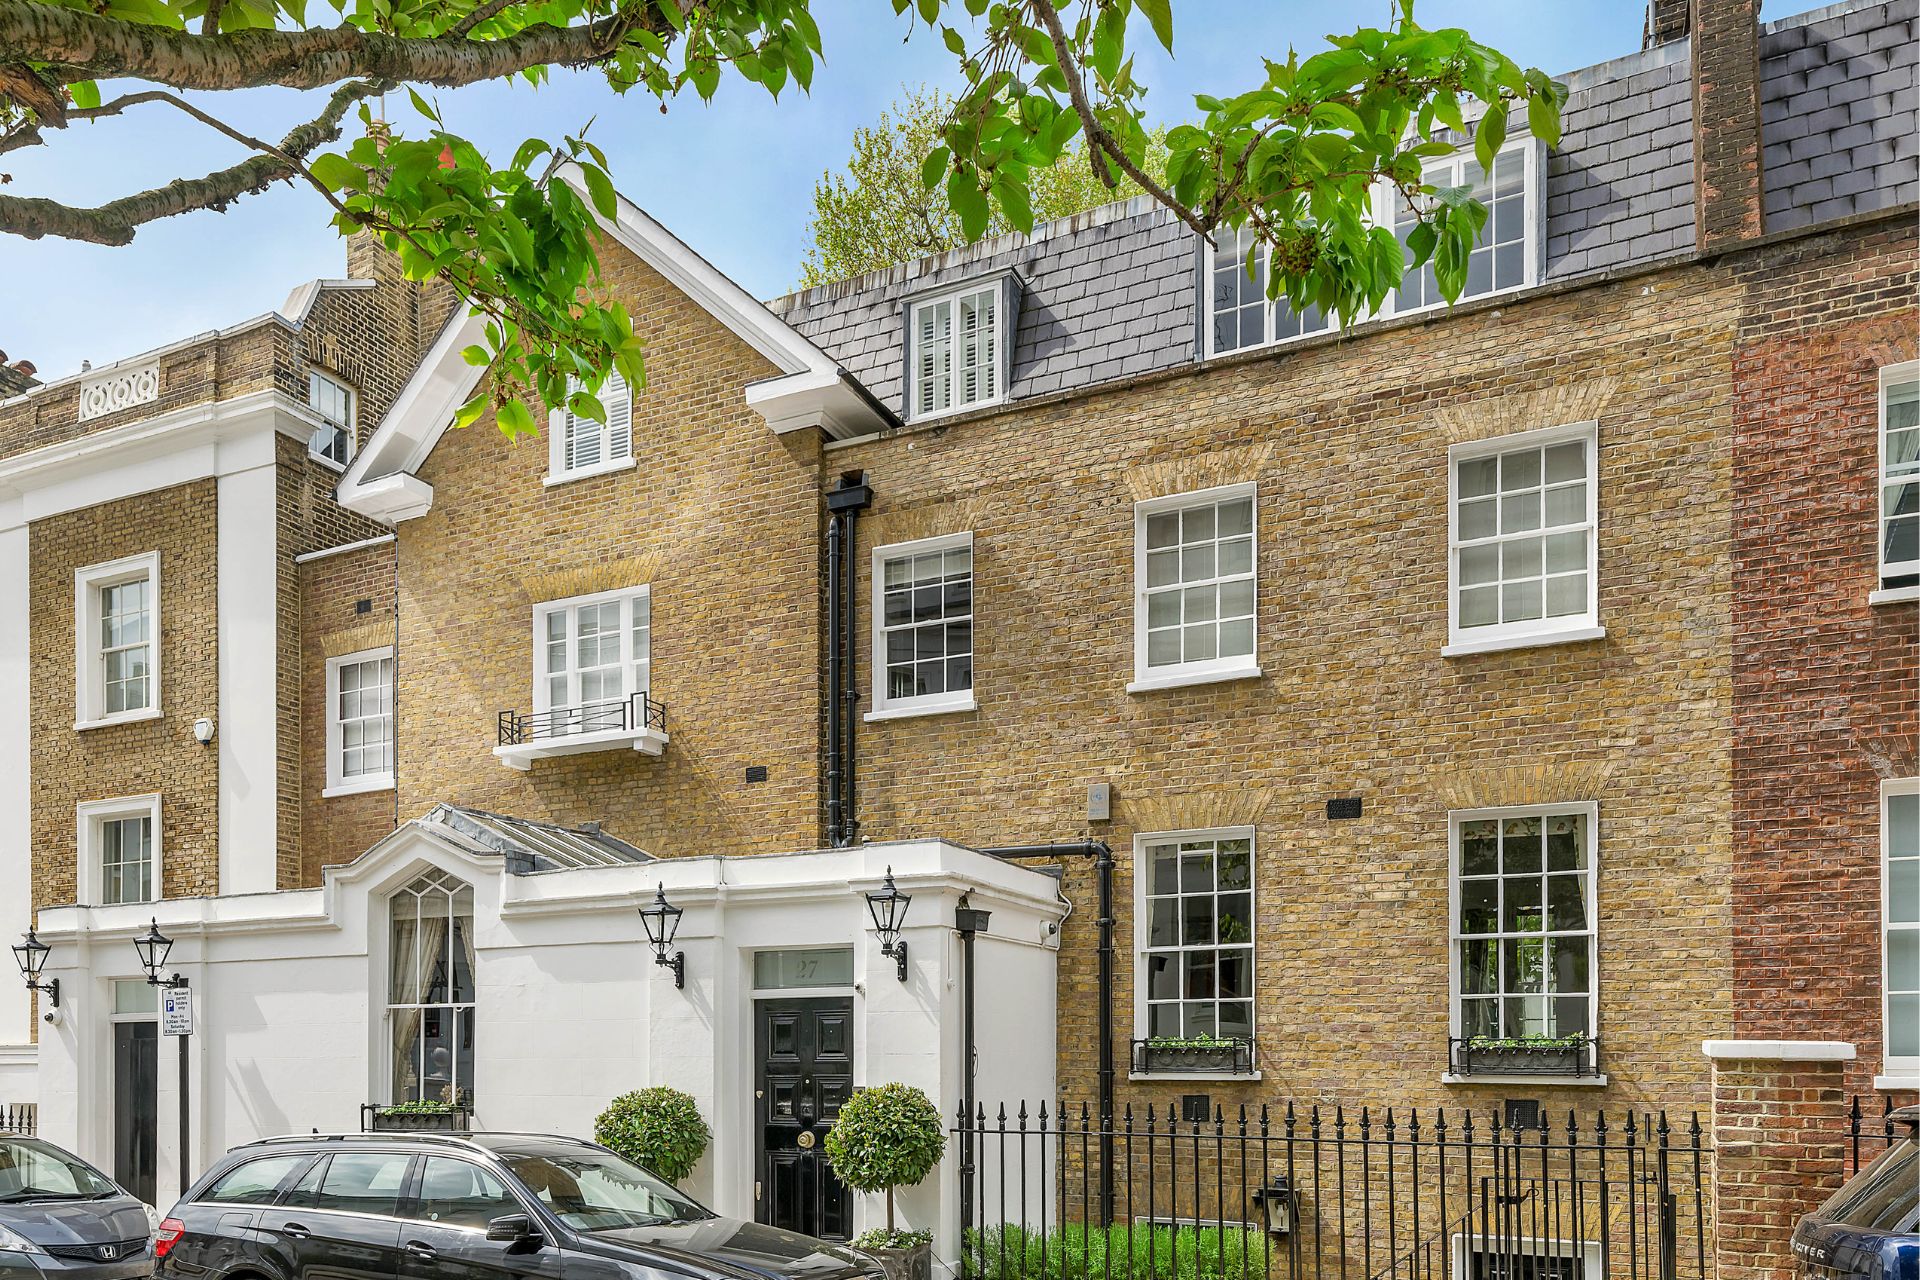 This £19.5 Million Kensington Property Was Once Winston Churchill’s Home